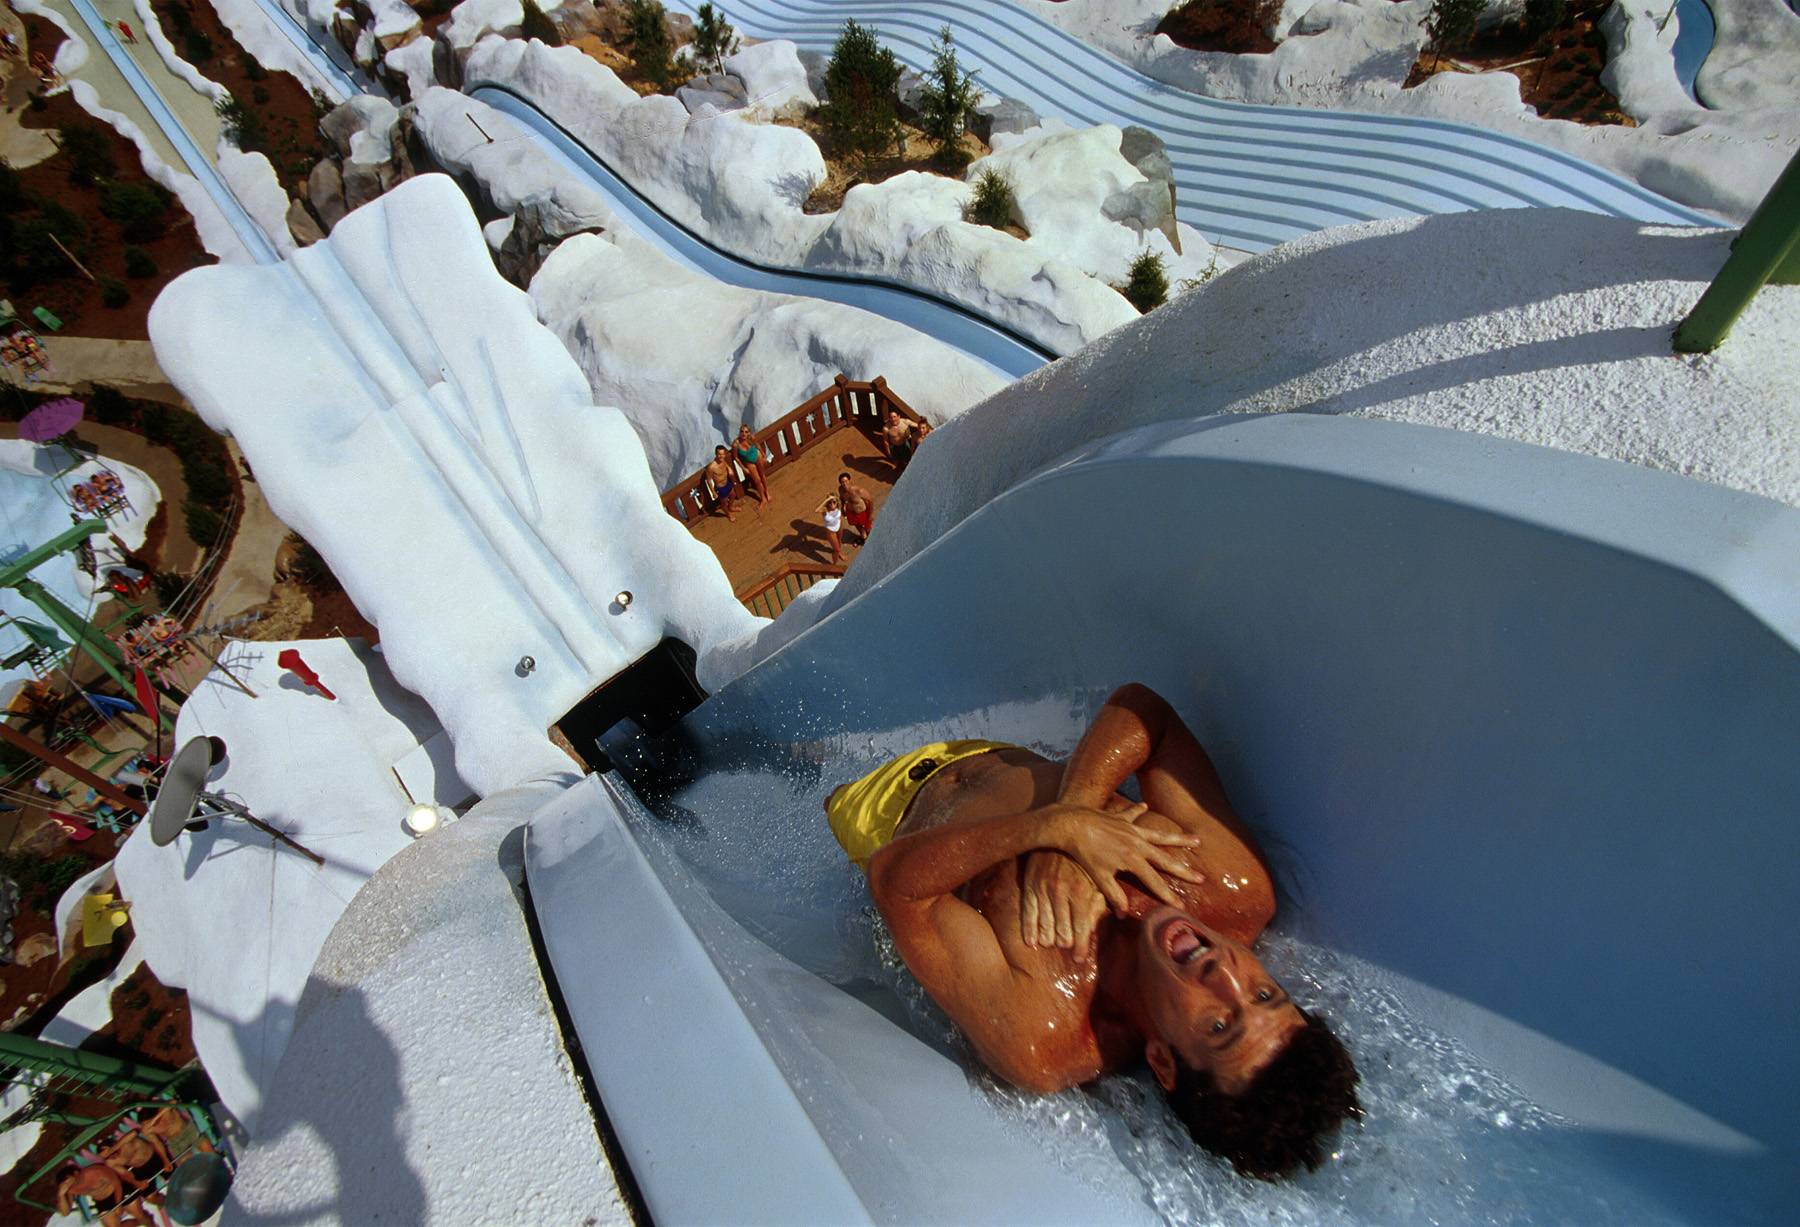 Blizzard Beach reopens March 7 2021